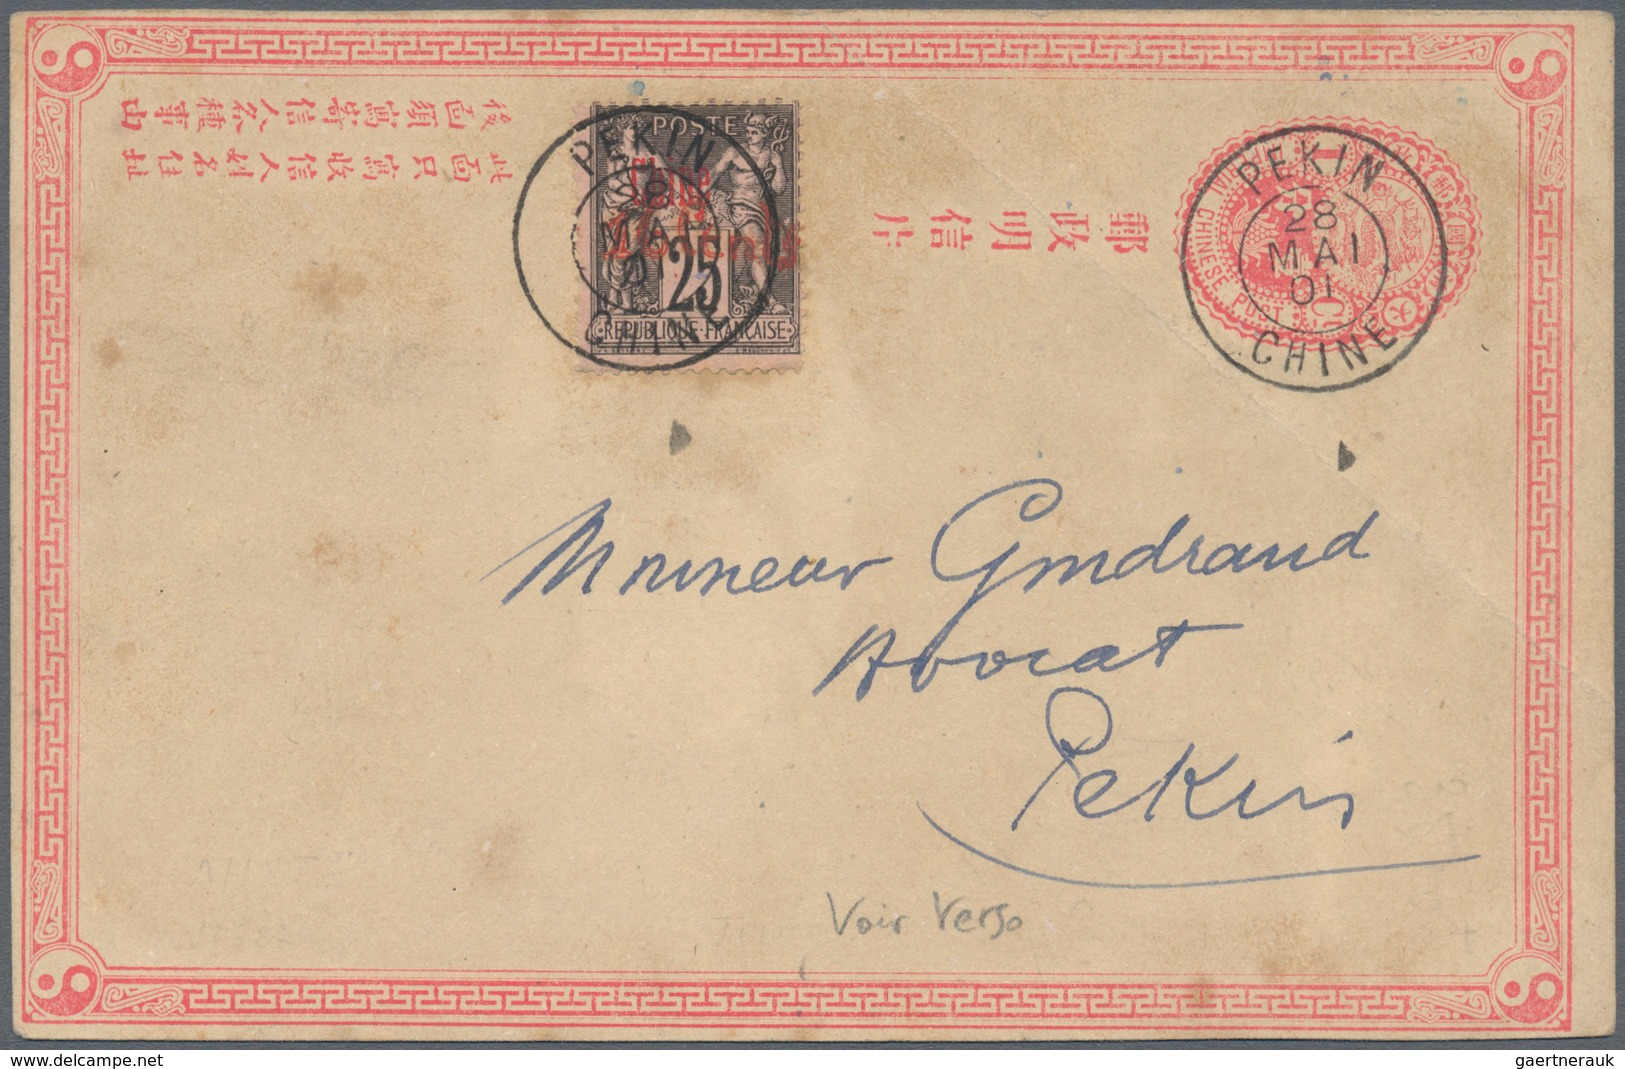 China - Ganzsachen: 1897, Card ICP Used As Form With French Offices Ovpt. 16 C./25 C. In Red, Tied " - Ansichtskarten